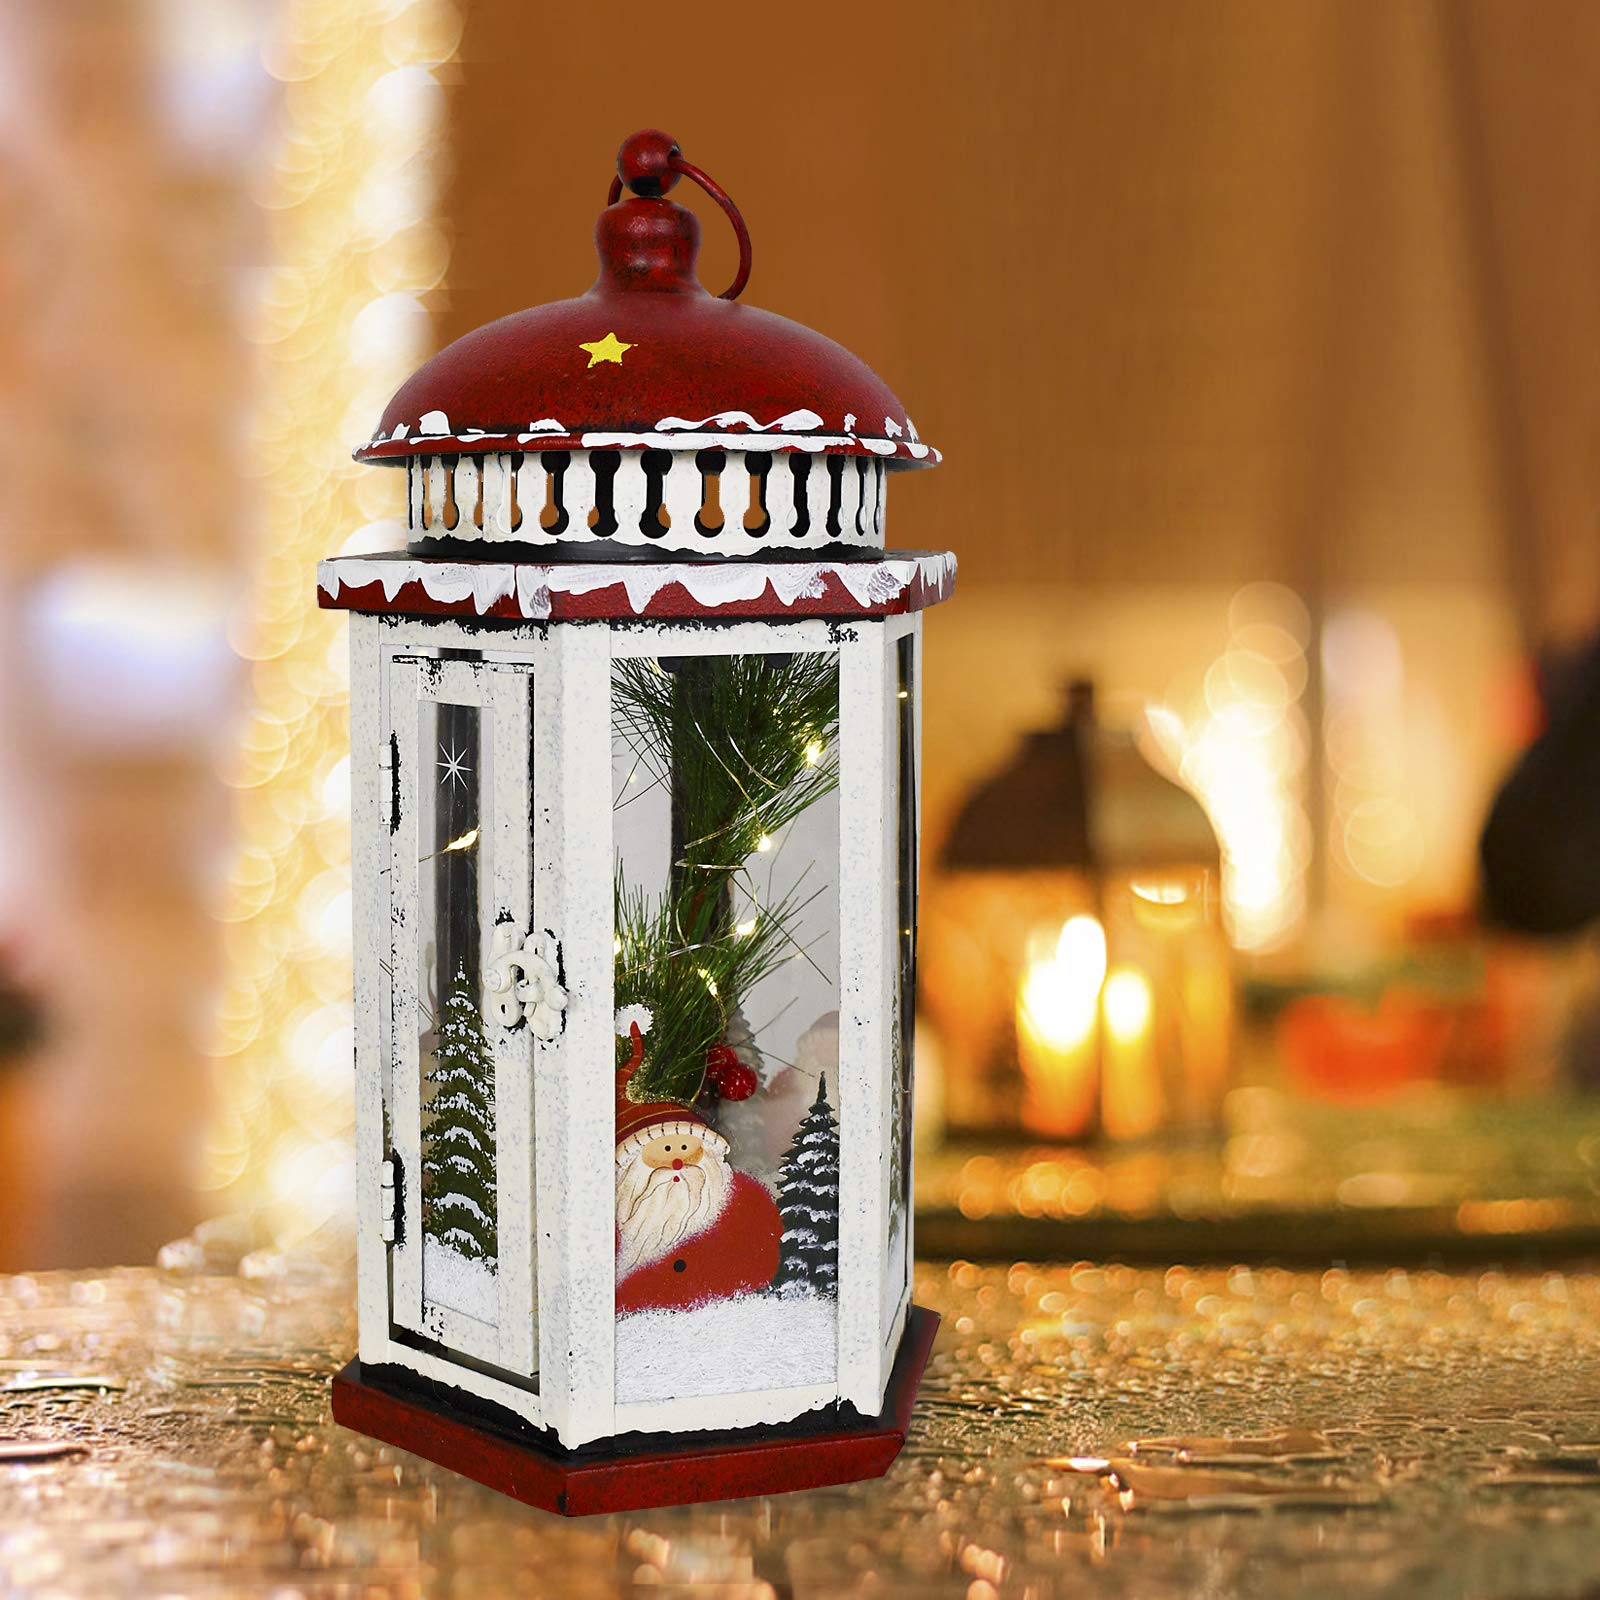 E-VIEW Metal Christmas Lanterns with Led Lights - Snowman Decorative Hanging Lantern Indoor Outdoor Mini Xmas Home Decoration Iron Tabl